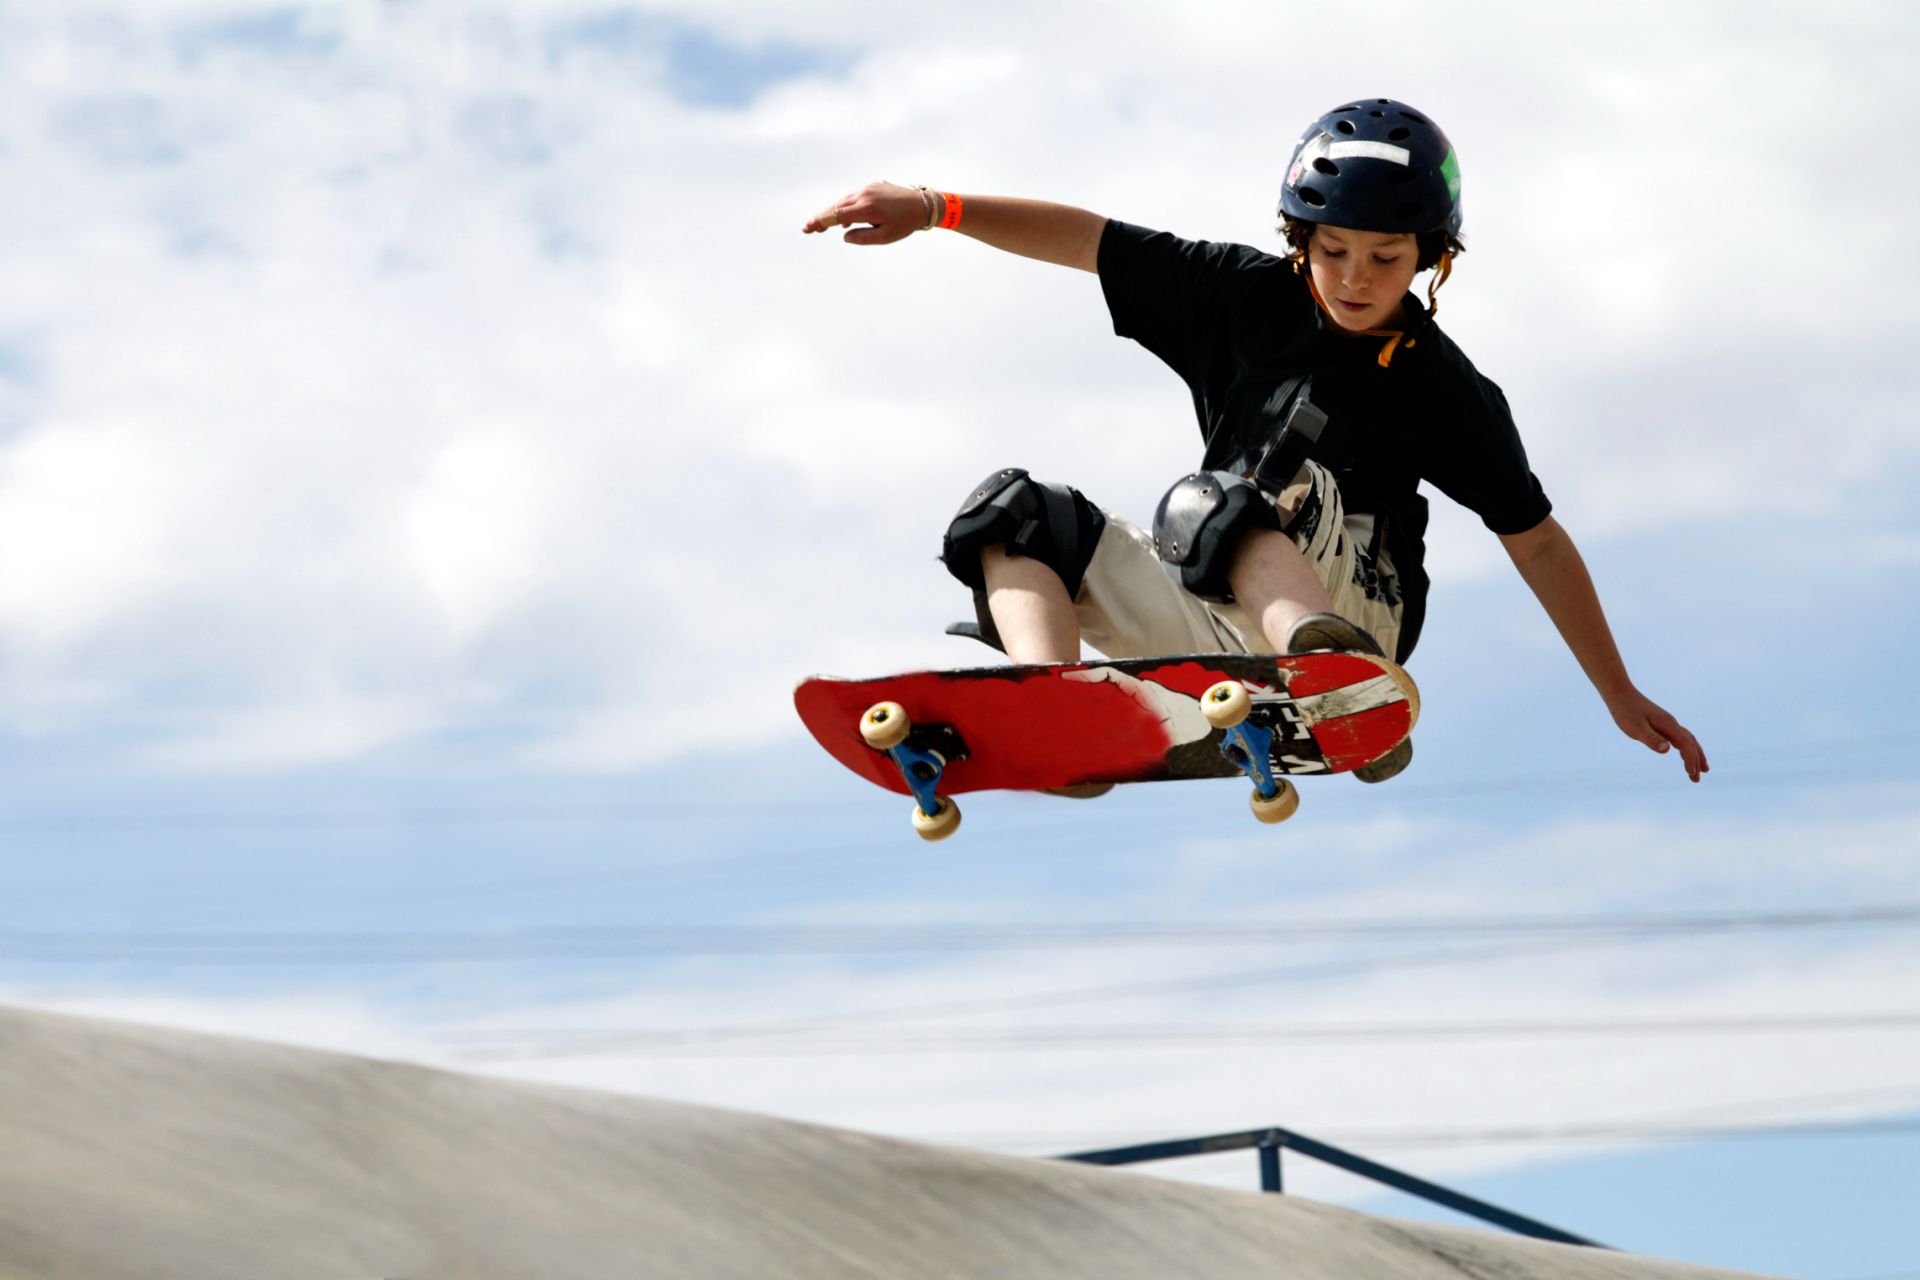 Facts about Skateboarding for Kids | DK Find Out